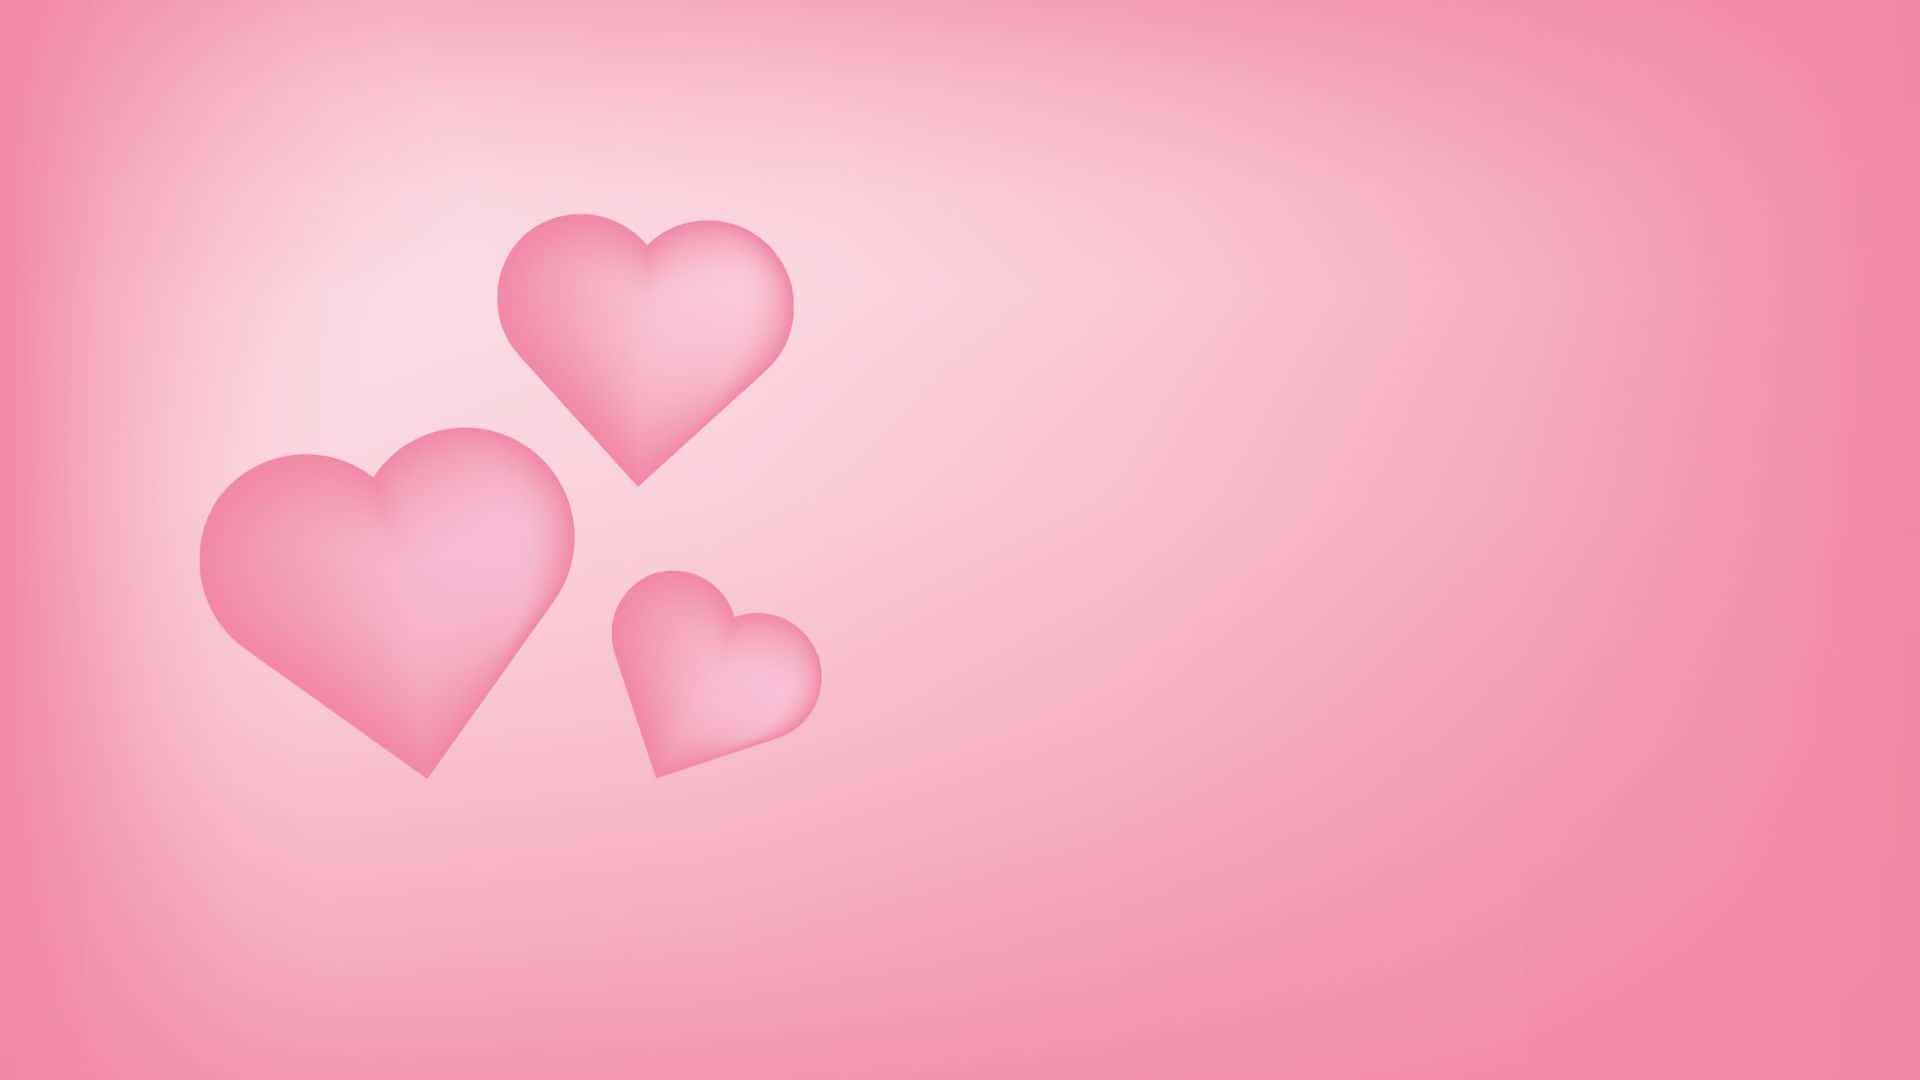 100+] Pink Love Wallpapers